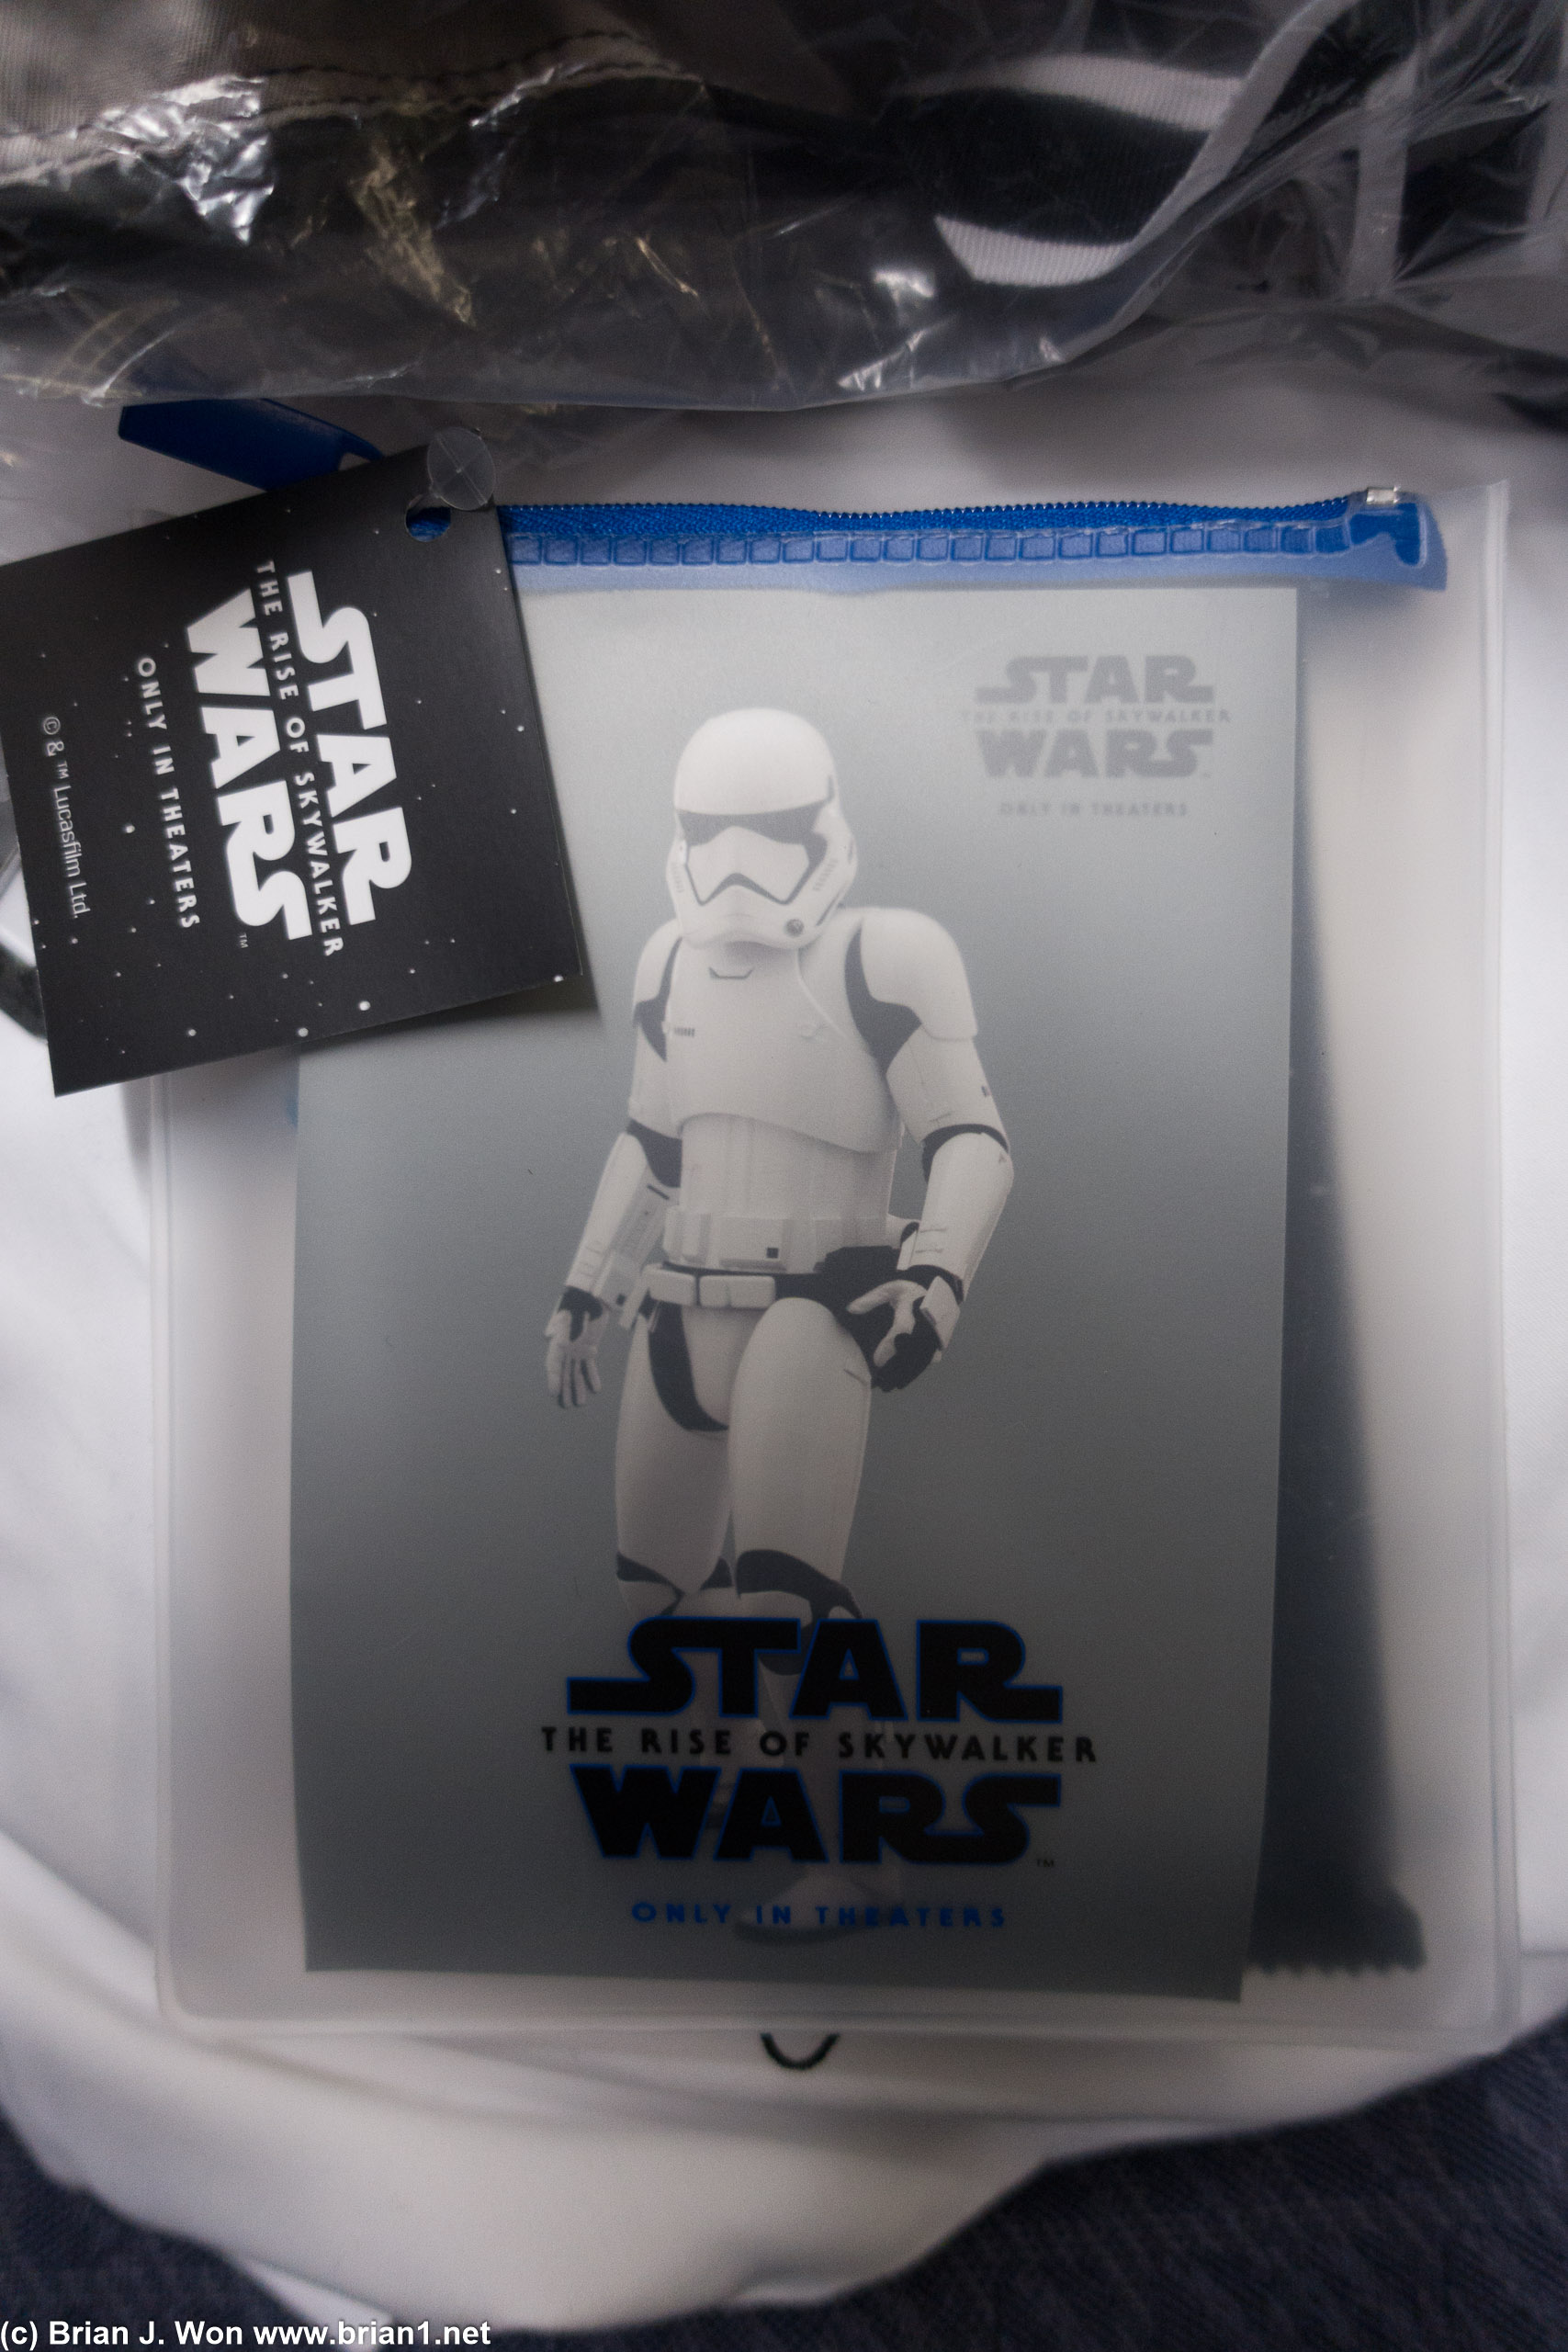 Star Wars amenity kit for transcontinential business class.